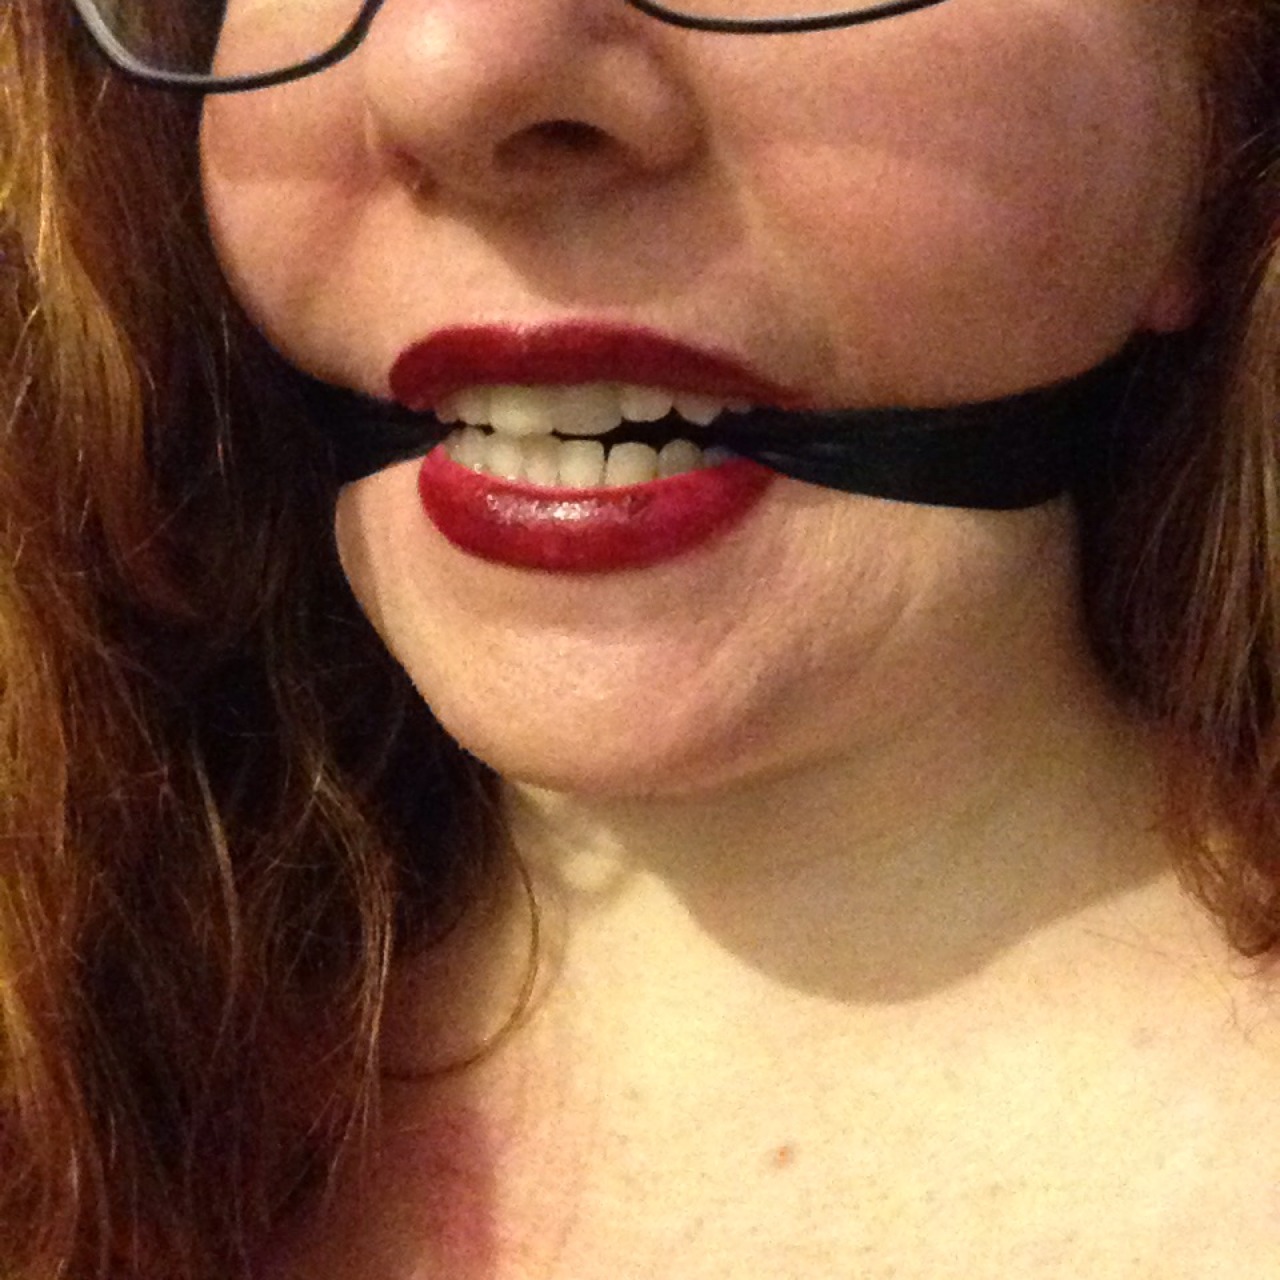 manic-pixie-ginger-slut:  A photo set of me donning the most restrictive tape gag